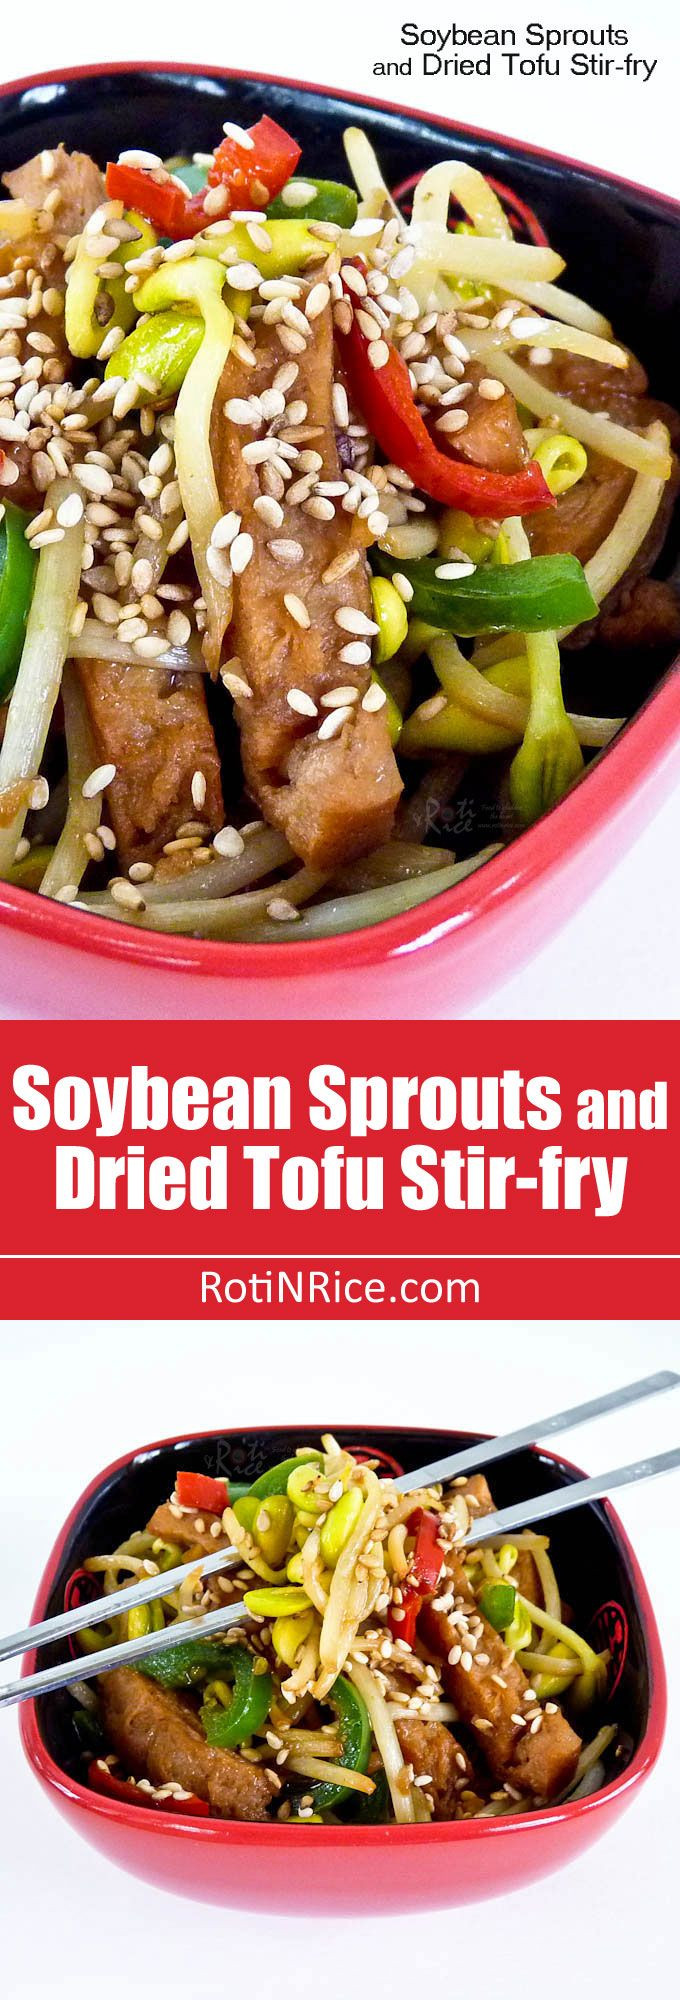 Dried Tofu Recipes
 Soybean Sprouts and Dried Tofu Stir fry